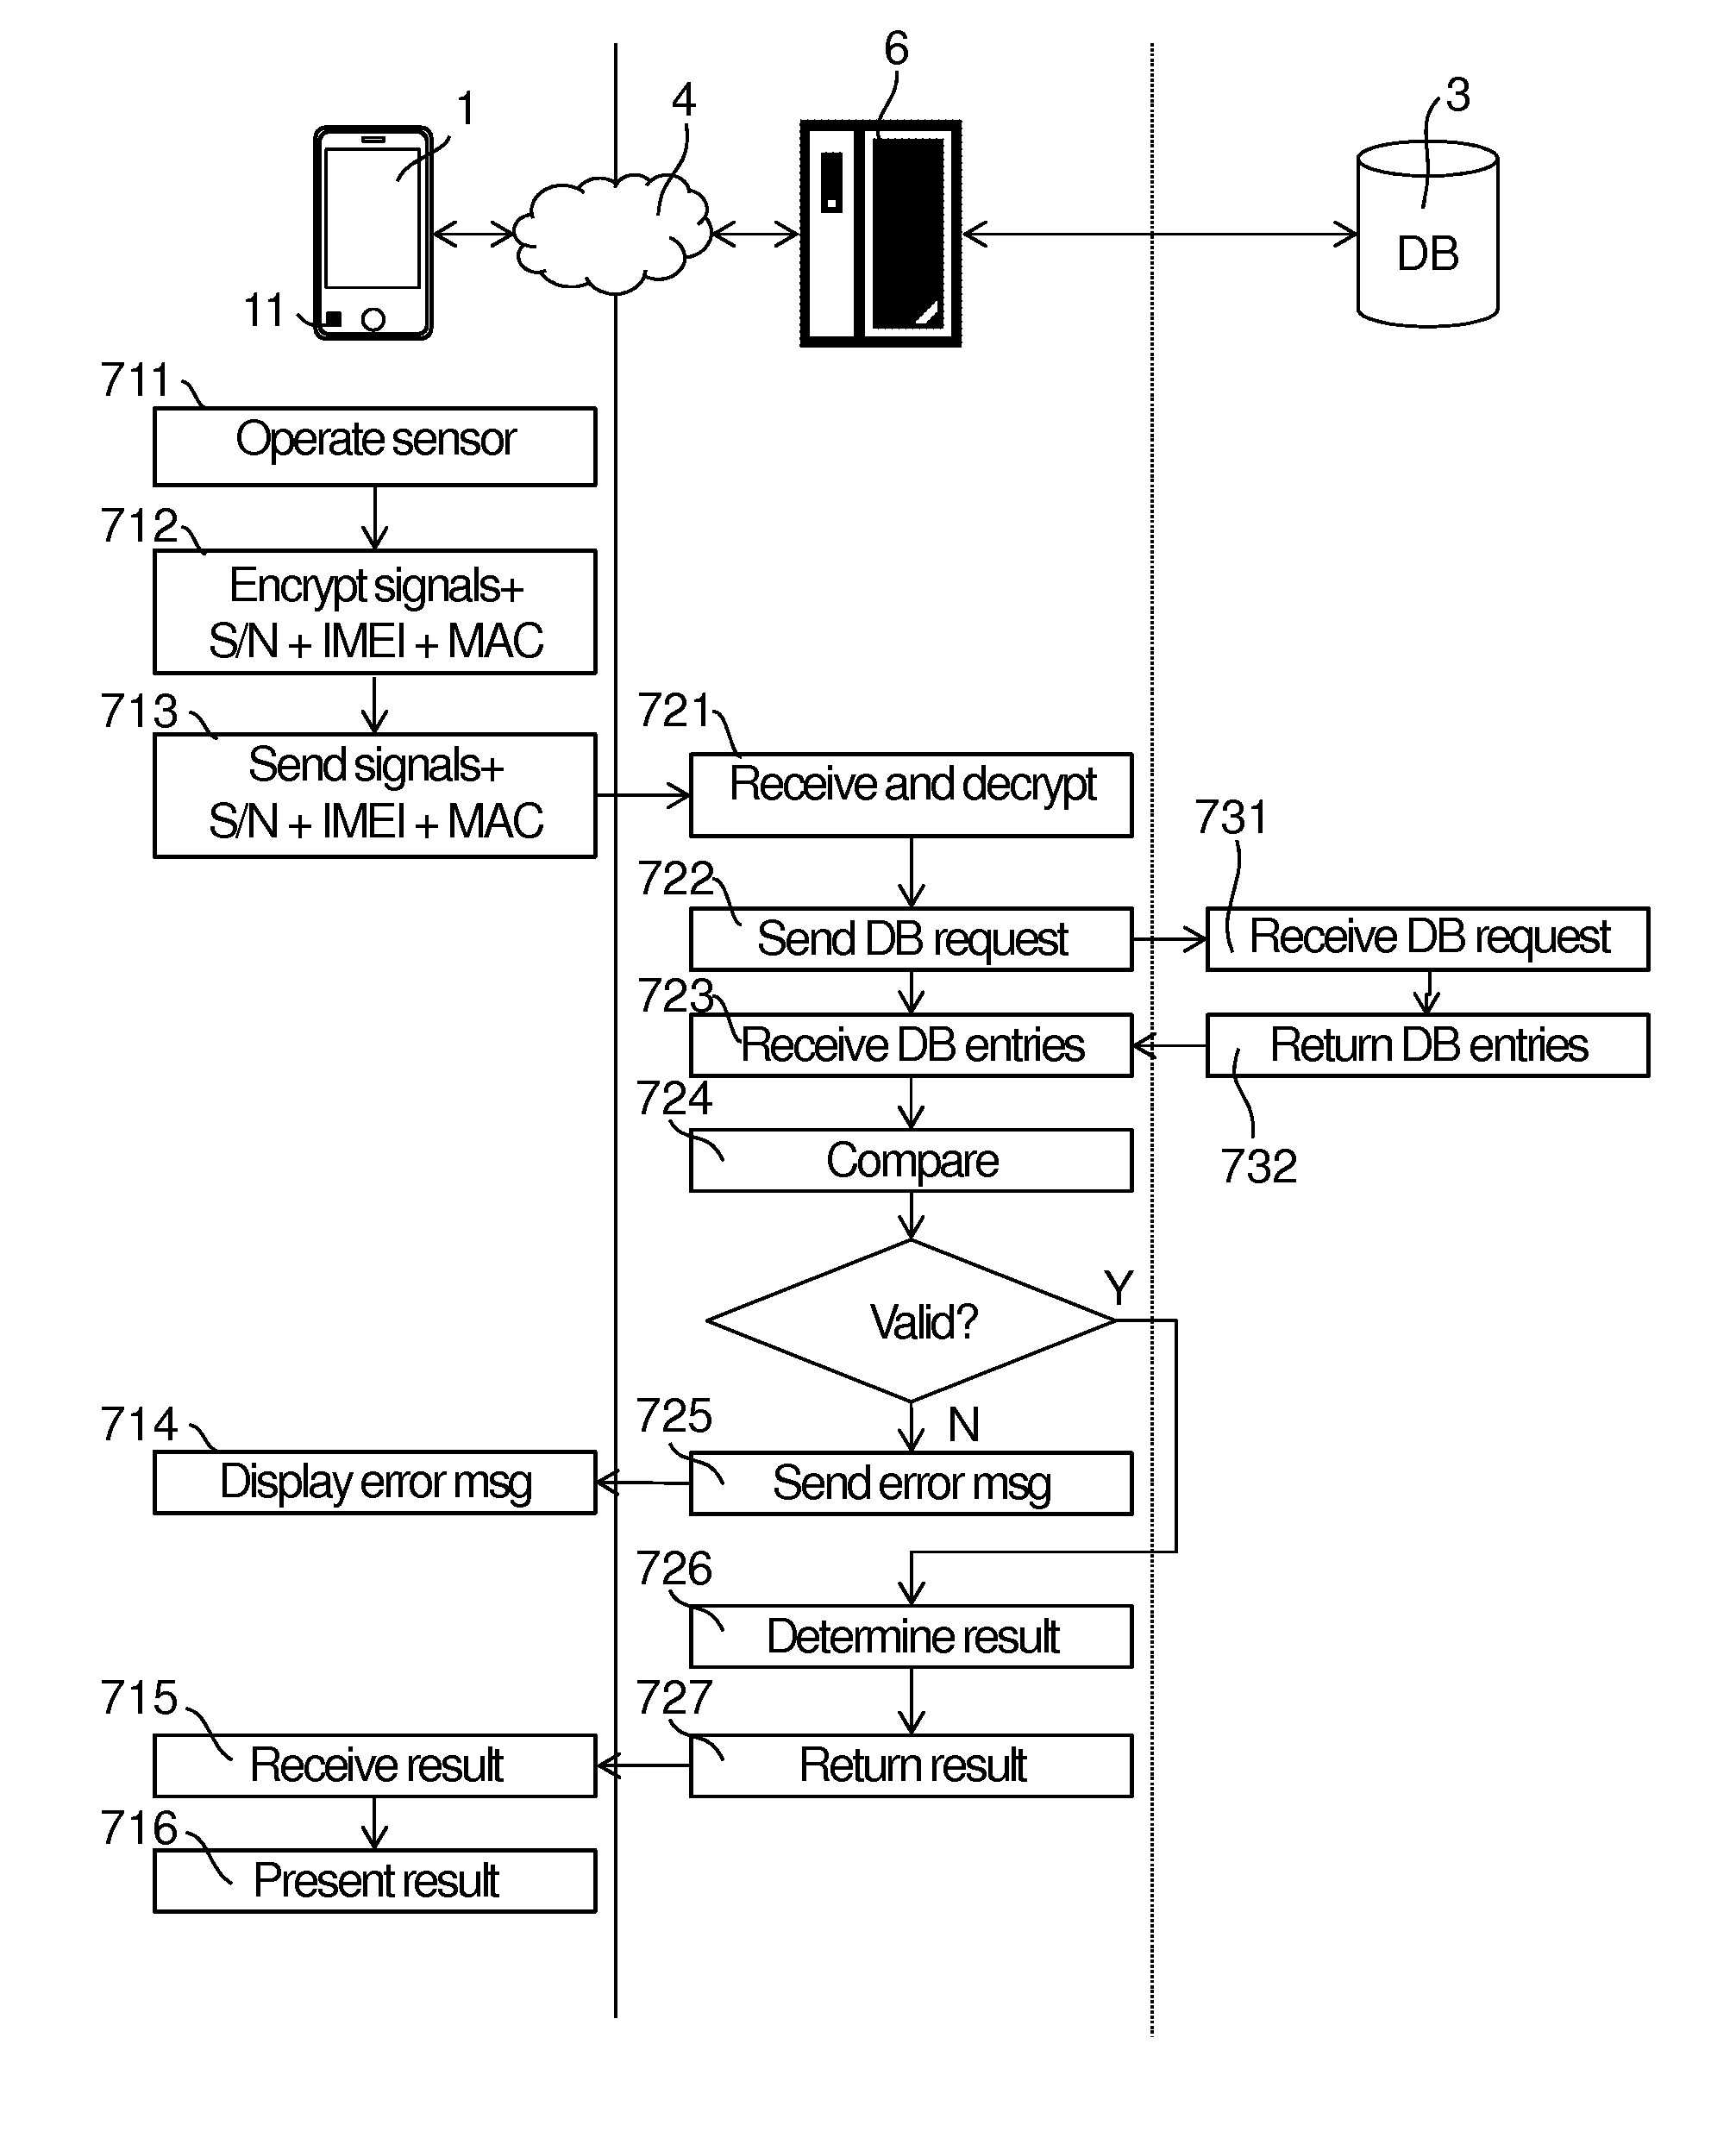 Authentication of a chemical sensor in a portable electronic device